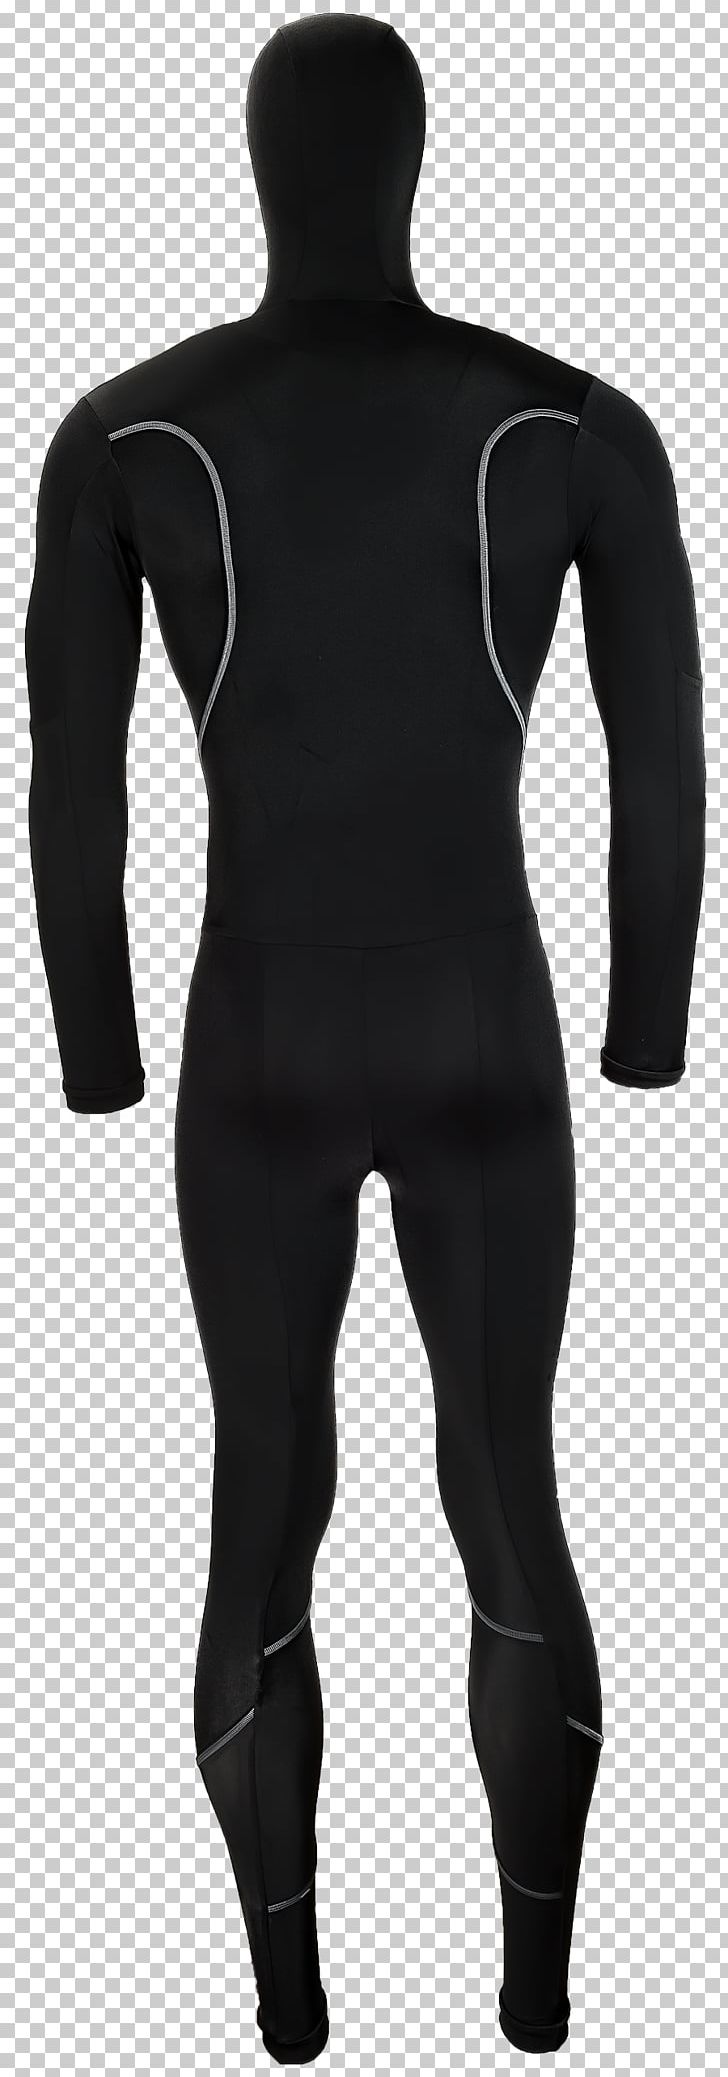 Wetsuit Hood Dry Suit Zipper Personal Protective Equipment PNG, Clipart, Billabong, Black, Cap, Clothing, Dry Suit Free PNG Download